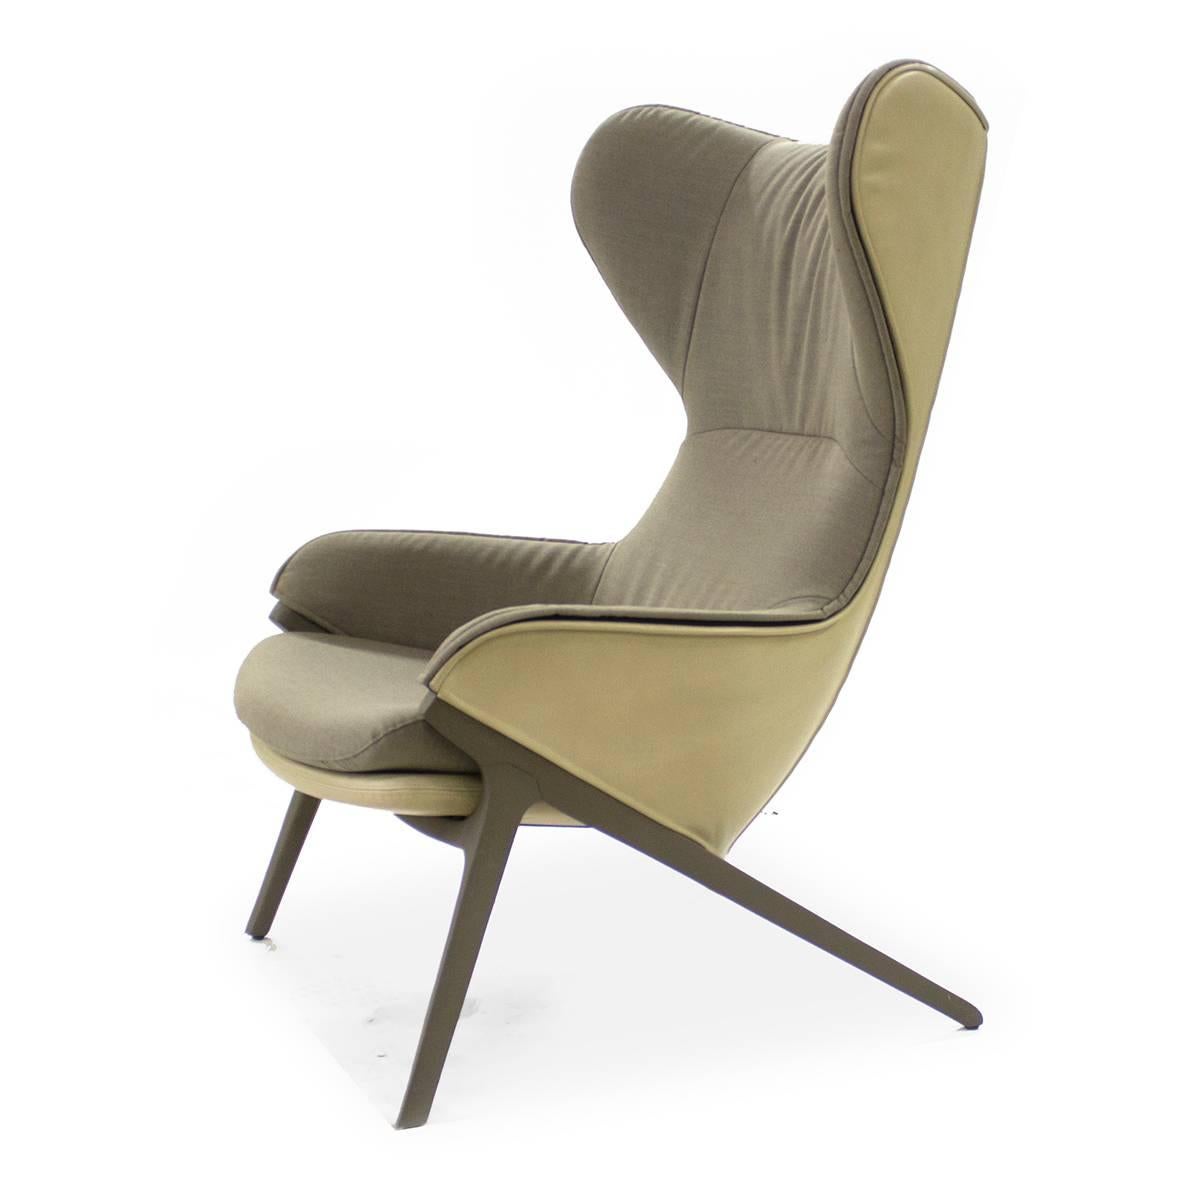 Armchair with shell in foam with an iron frame and elastic seat straps. Removable fabric or leather upholstery through zips sewn into the upholstery; option of choosing different fabric and leather set combinations for the internal and external